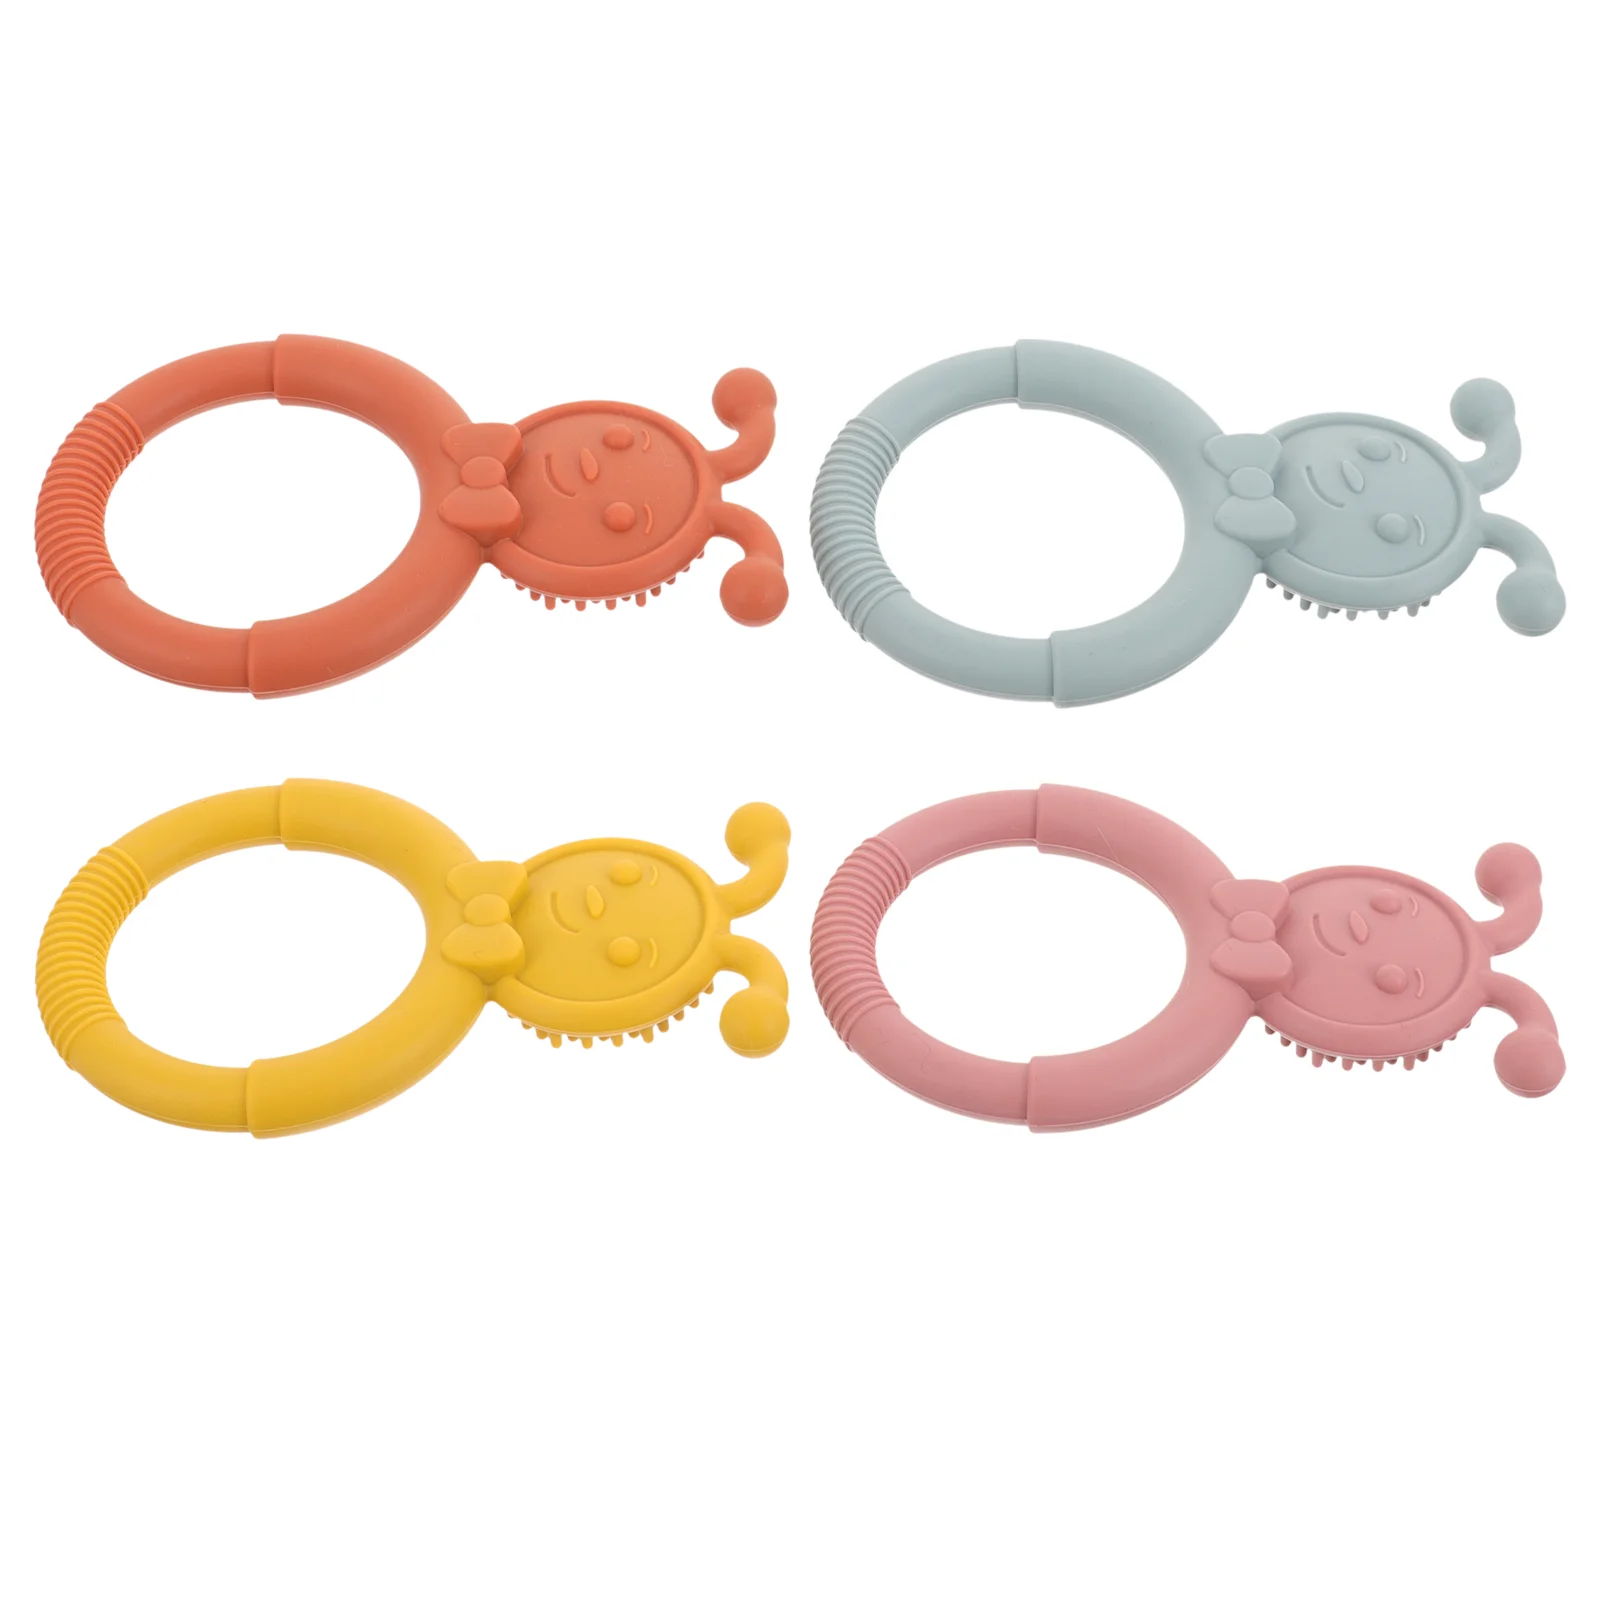 

4 Pcs Bite Toys Baby Toddler Teething Teether Playthings Molar Chew Ring Convenient Silica Gel Infant Silicone Sensory